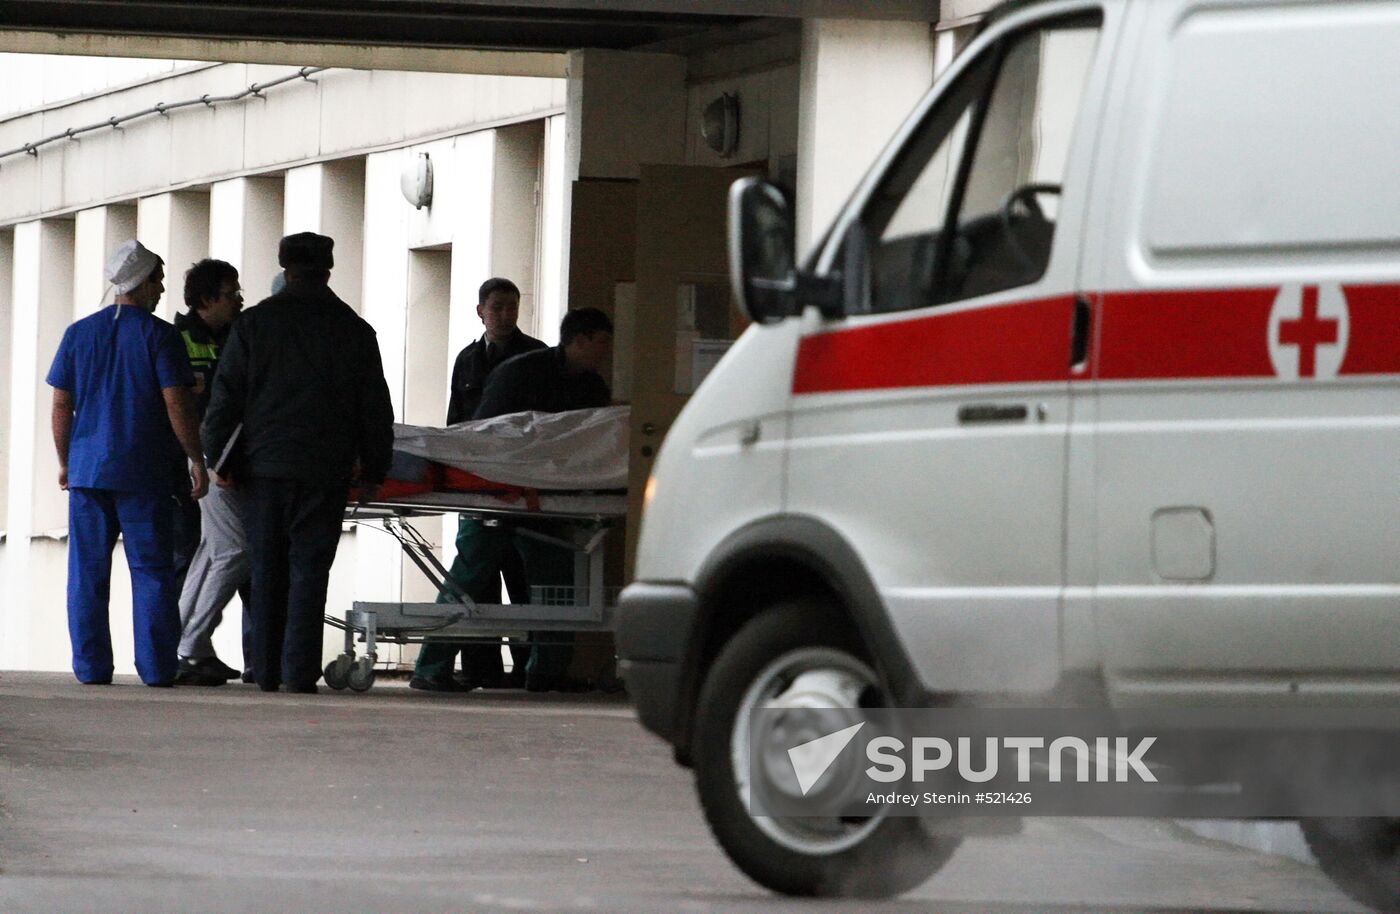 Perm nightclub fire victims brought to Moscow hospitals